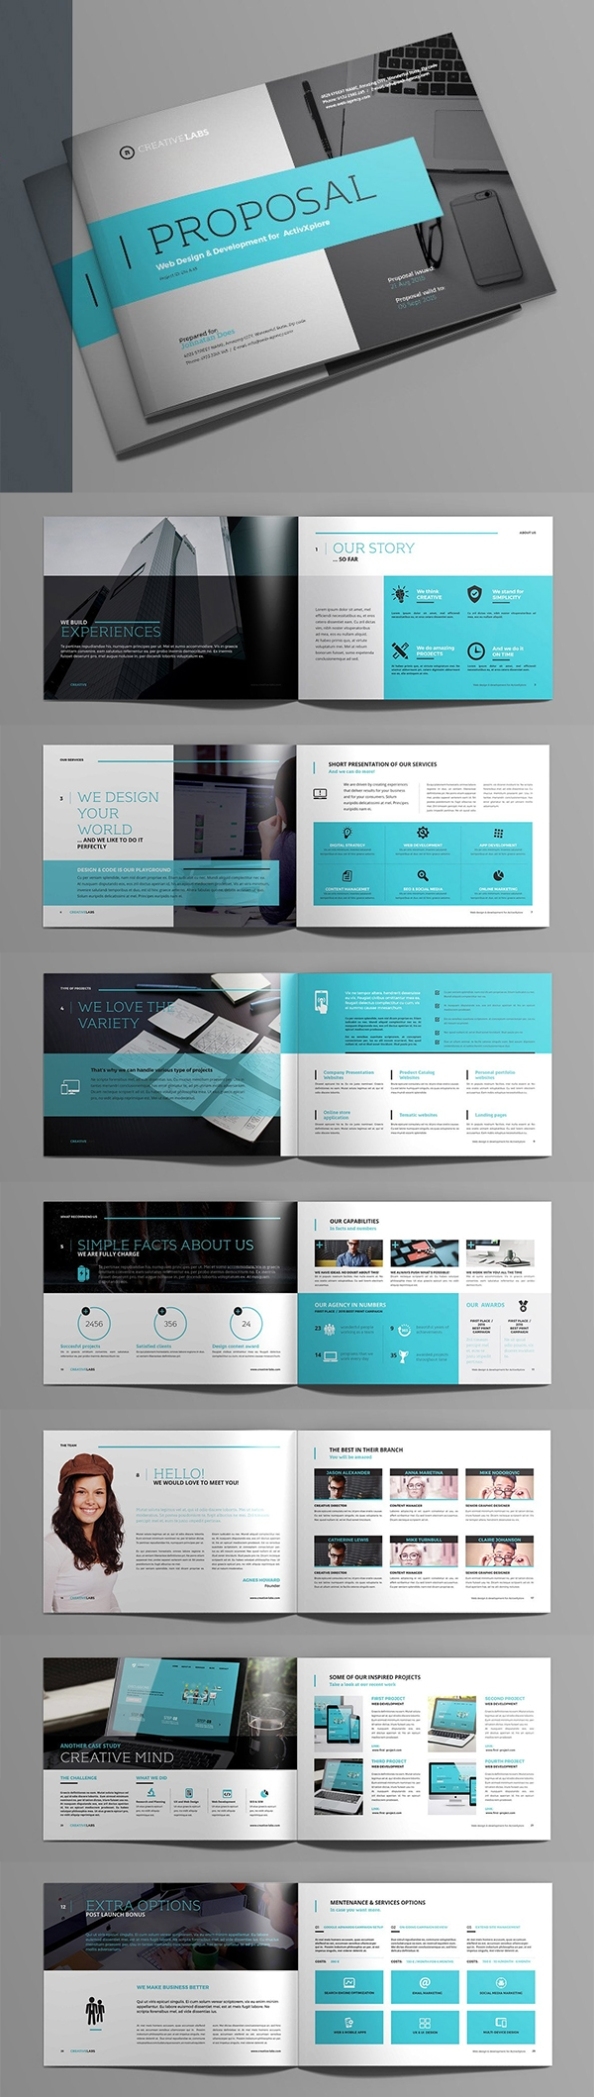 Business Proposal Templates | Design | Graphic Design Junction With Regard To Web Design Proposal Template